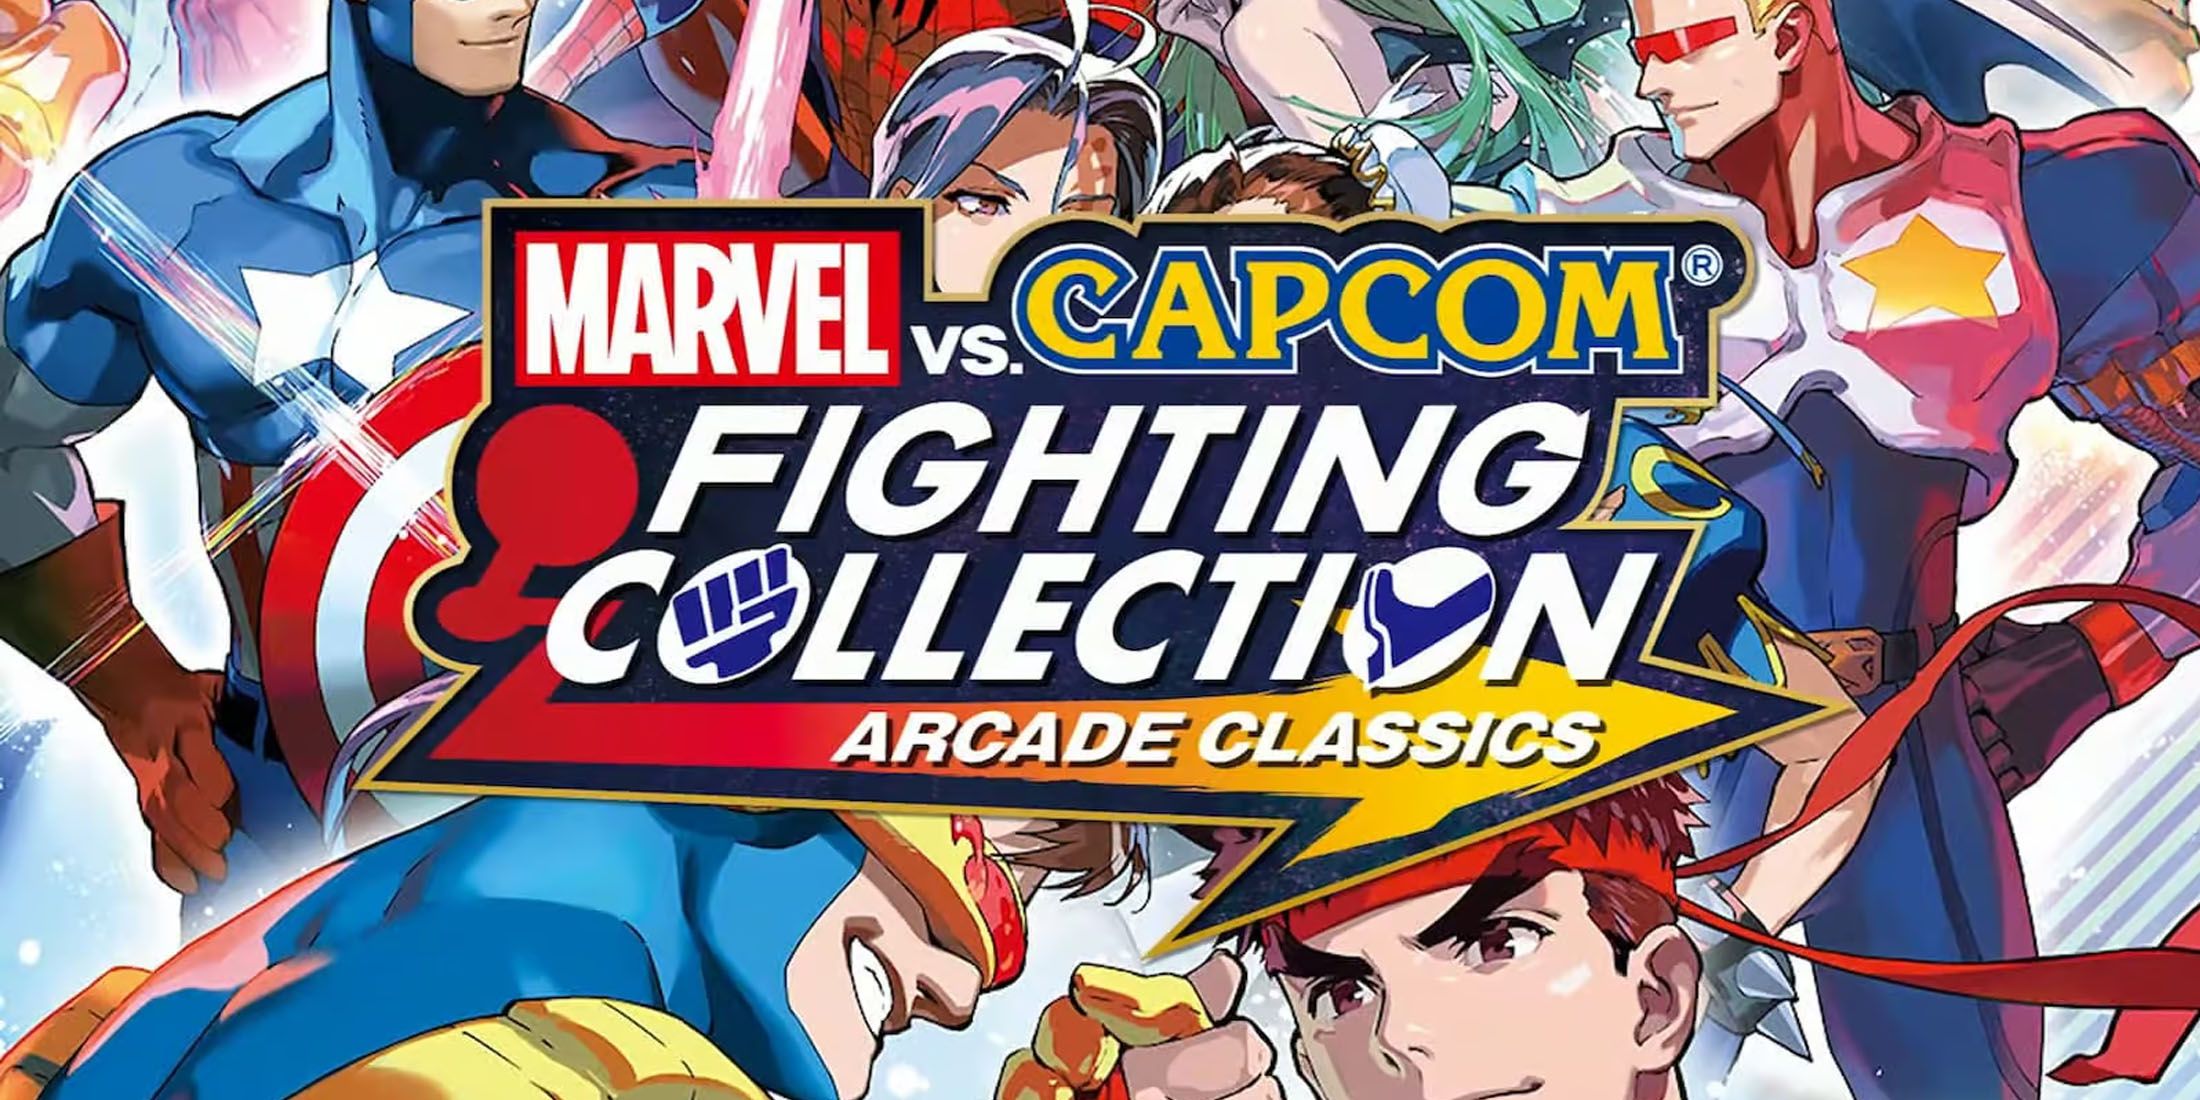 A promotional image for Marvel vs. Capcom Fighting Collection: Arcade Classics.